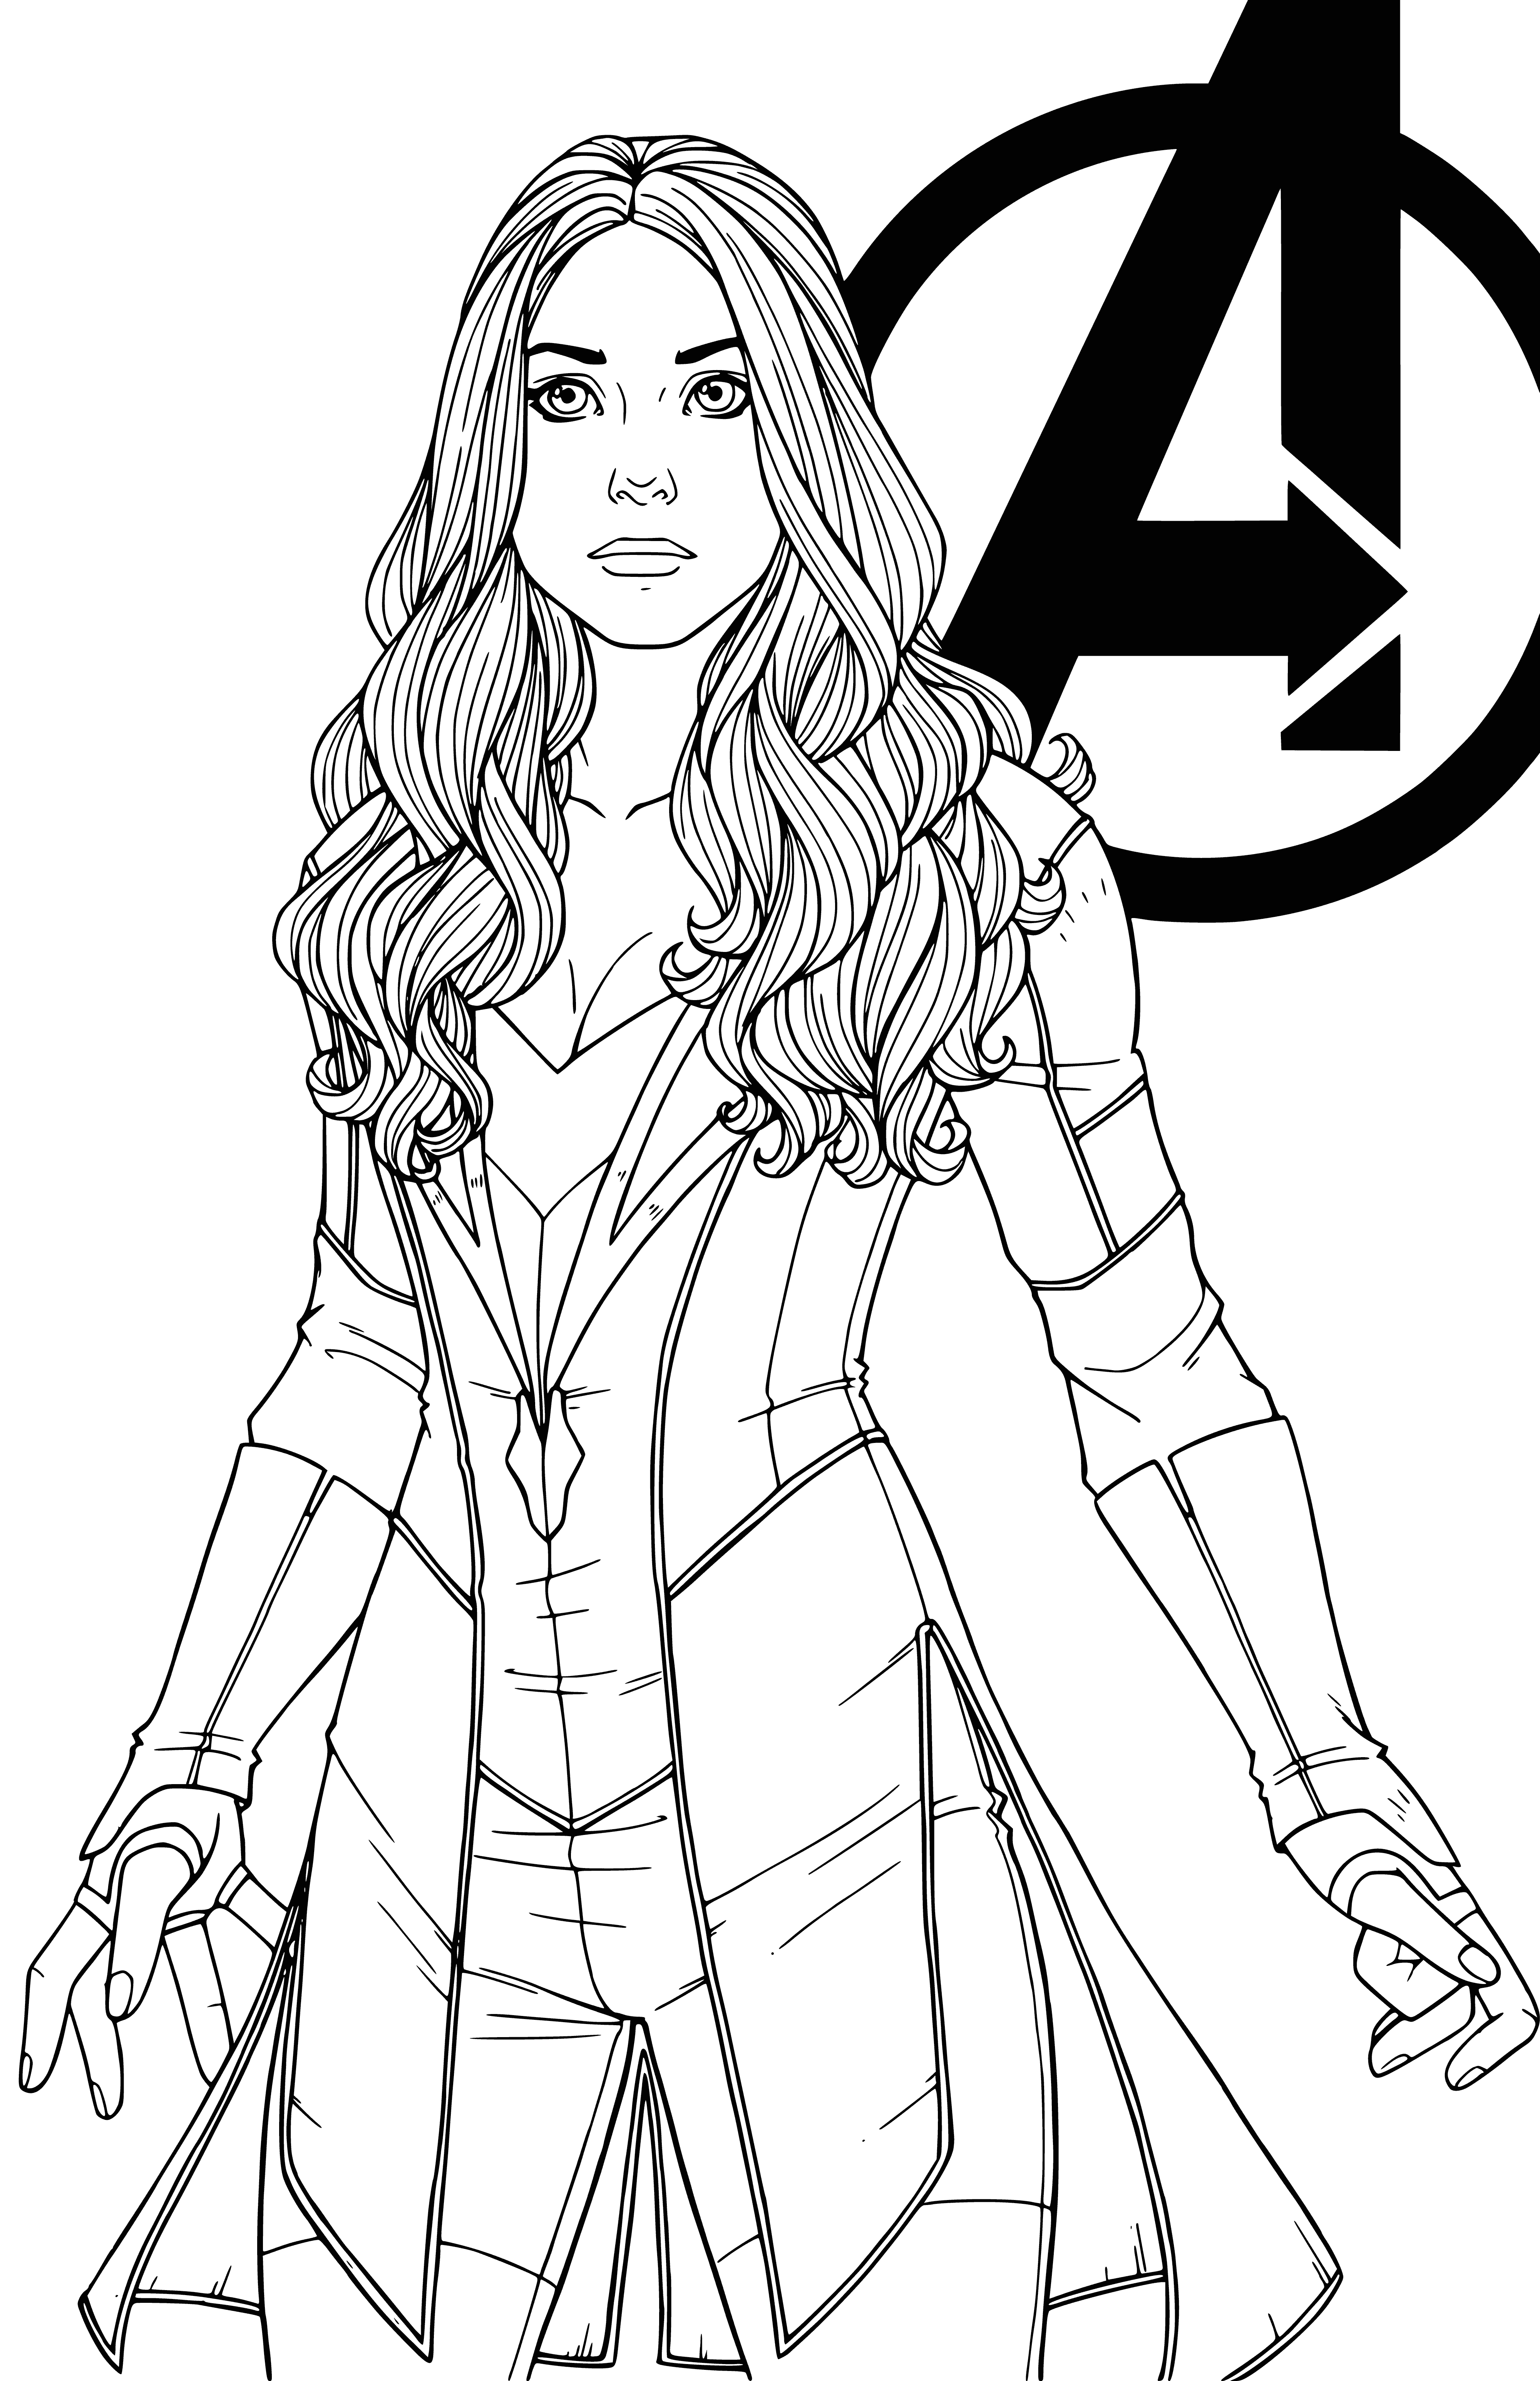 coloring page: Red Witch: Skilled superhero who uses magic to fight crime & protect innocent. Brave & determined, always stands for justice, powerful & experienced.